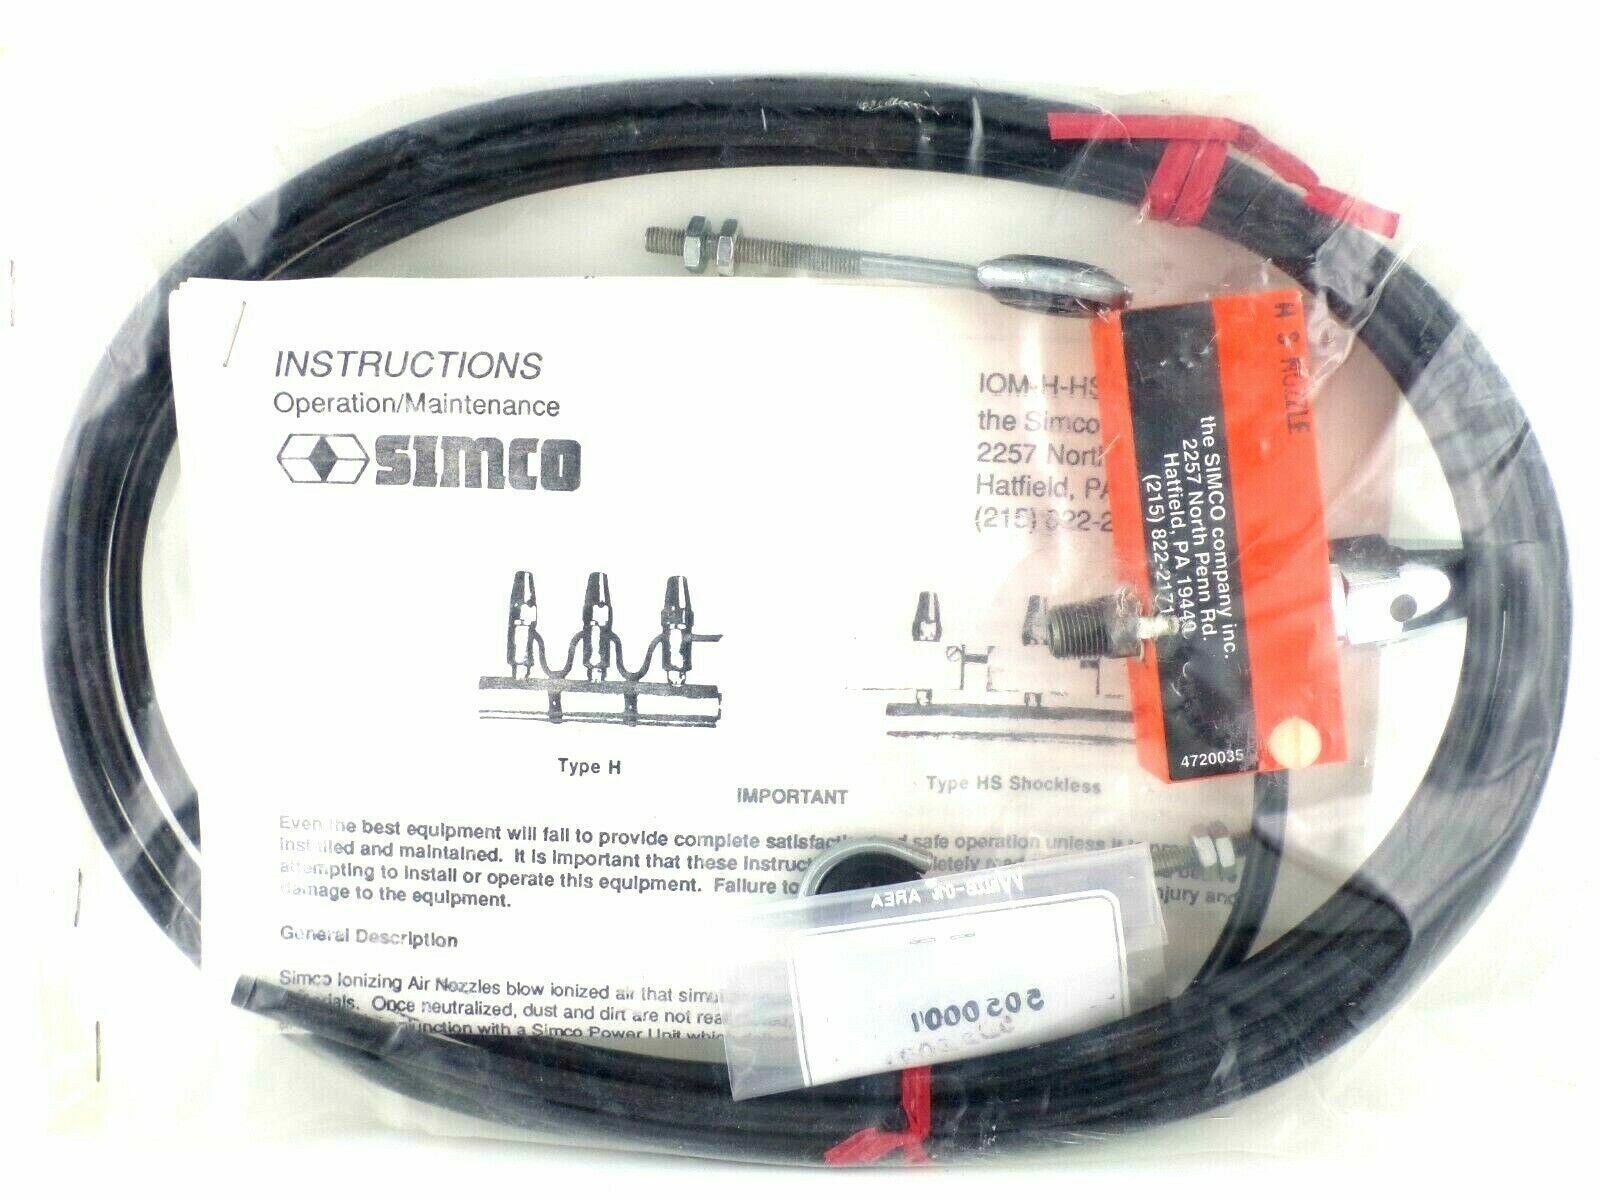 NEW Simco 4720035 Static Neutralizing Nozzle HS-Shockless, 1/8 NPT, Complete 